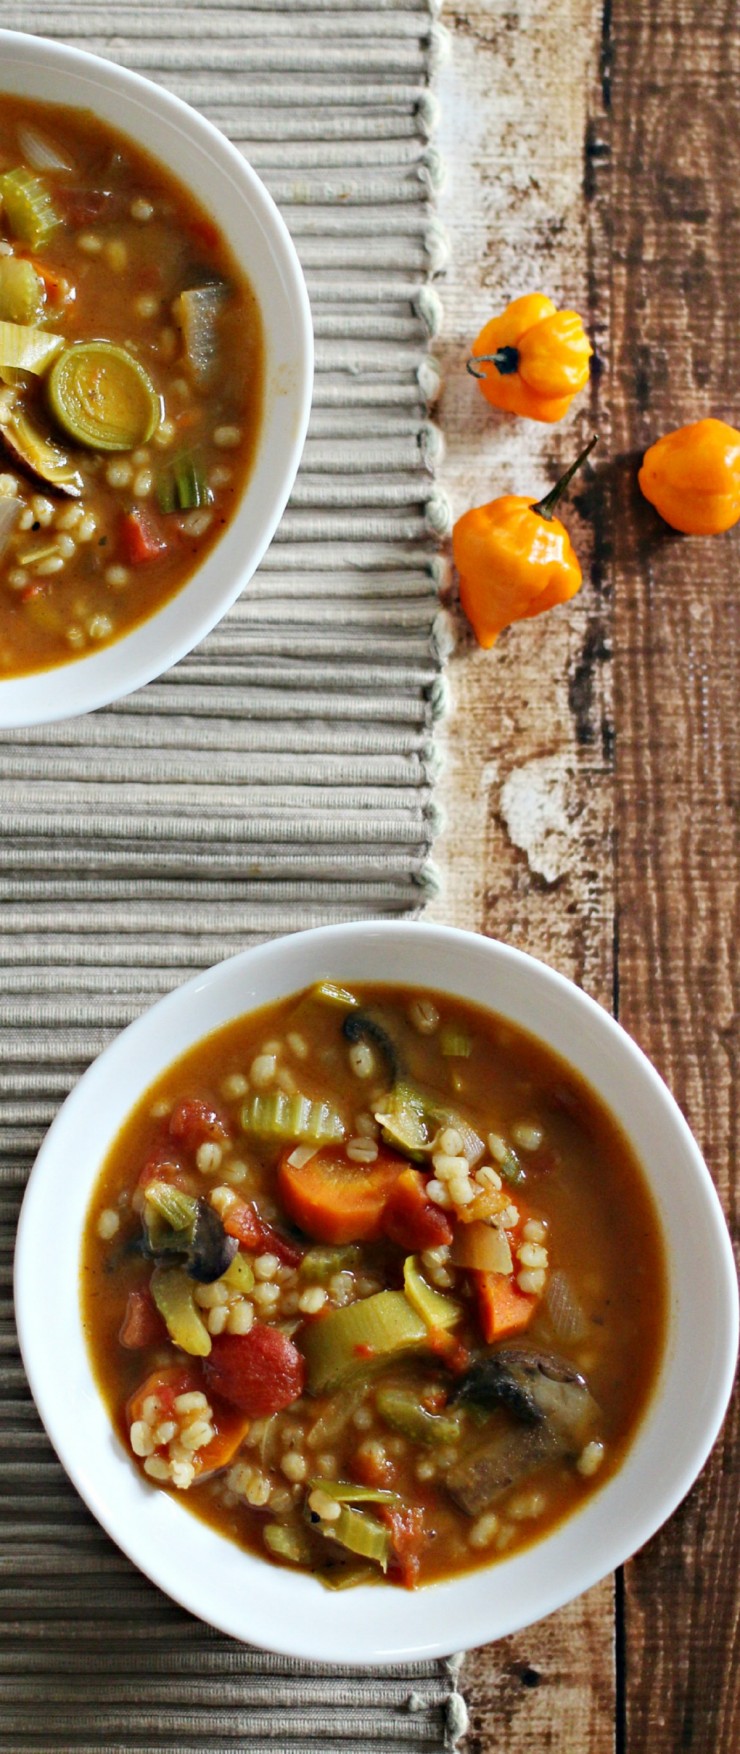 There is nothing better than a steaming hot bowl of homemade spicy barley and vegetable soup on a cold winter day. This is a favourite family recipe.